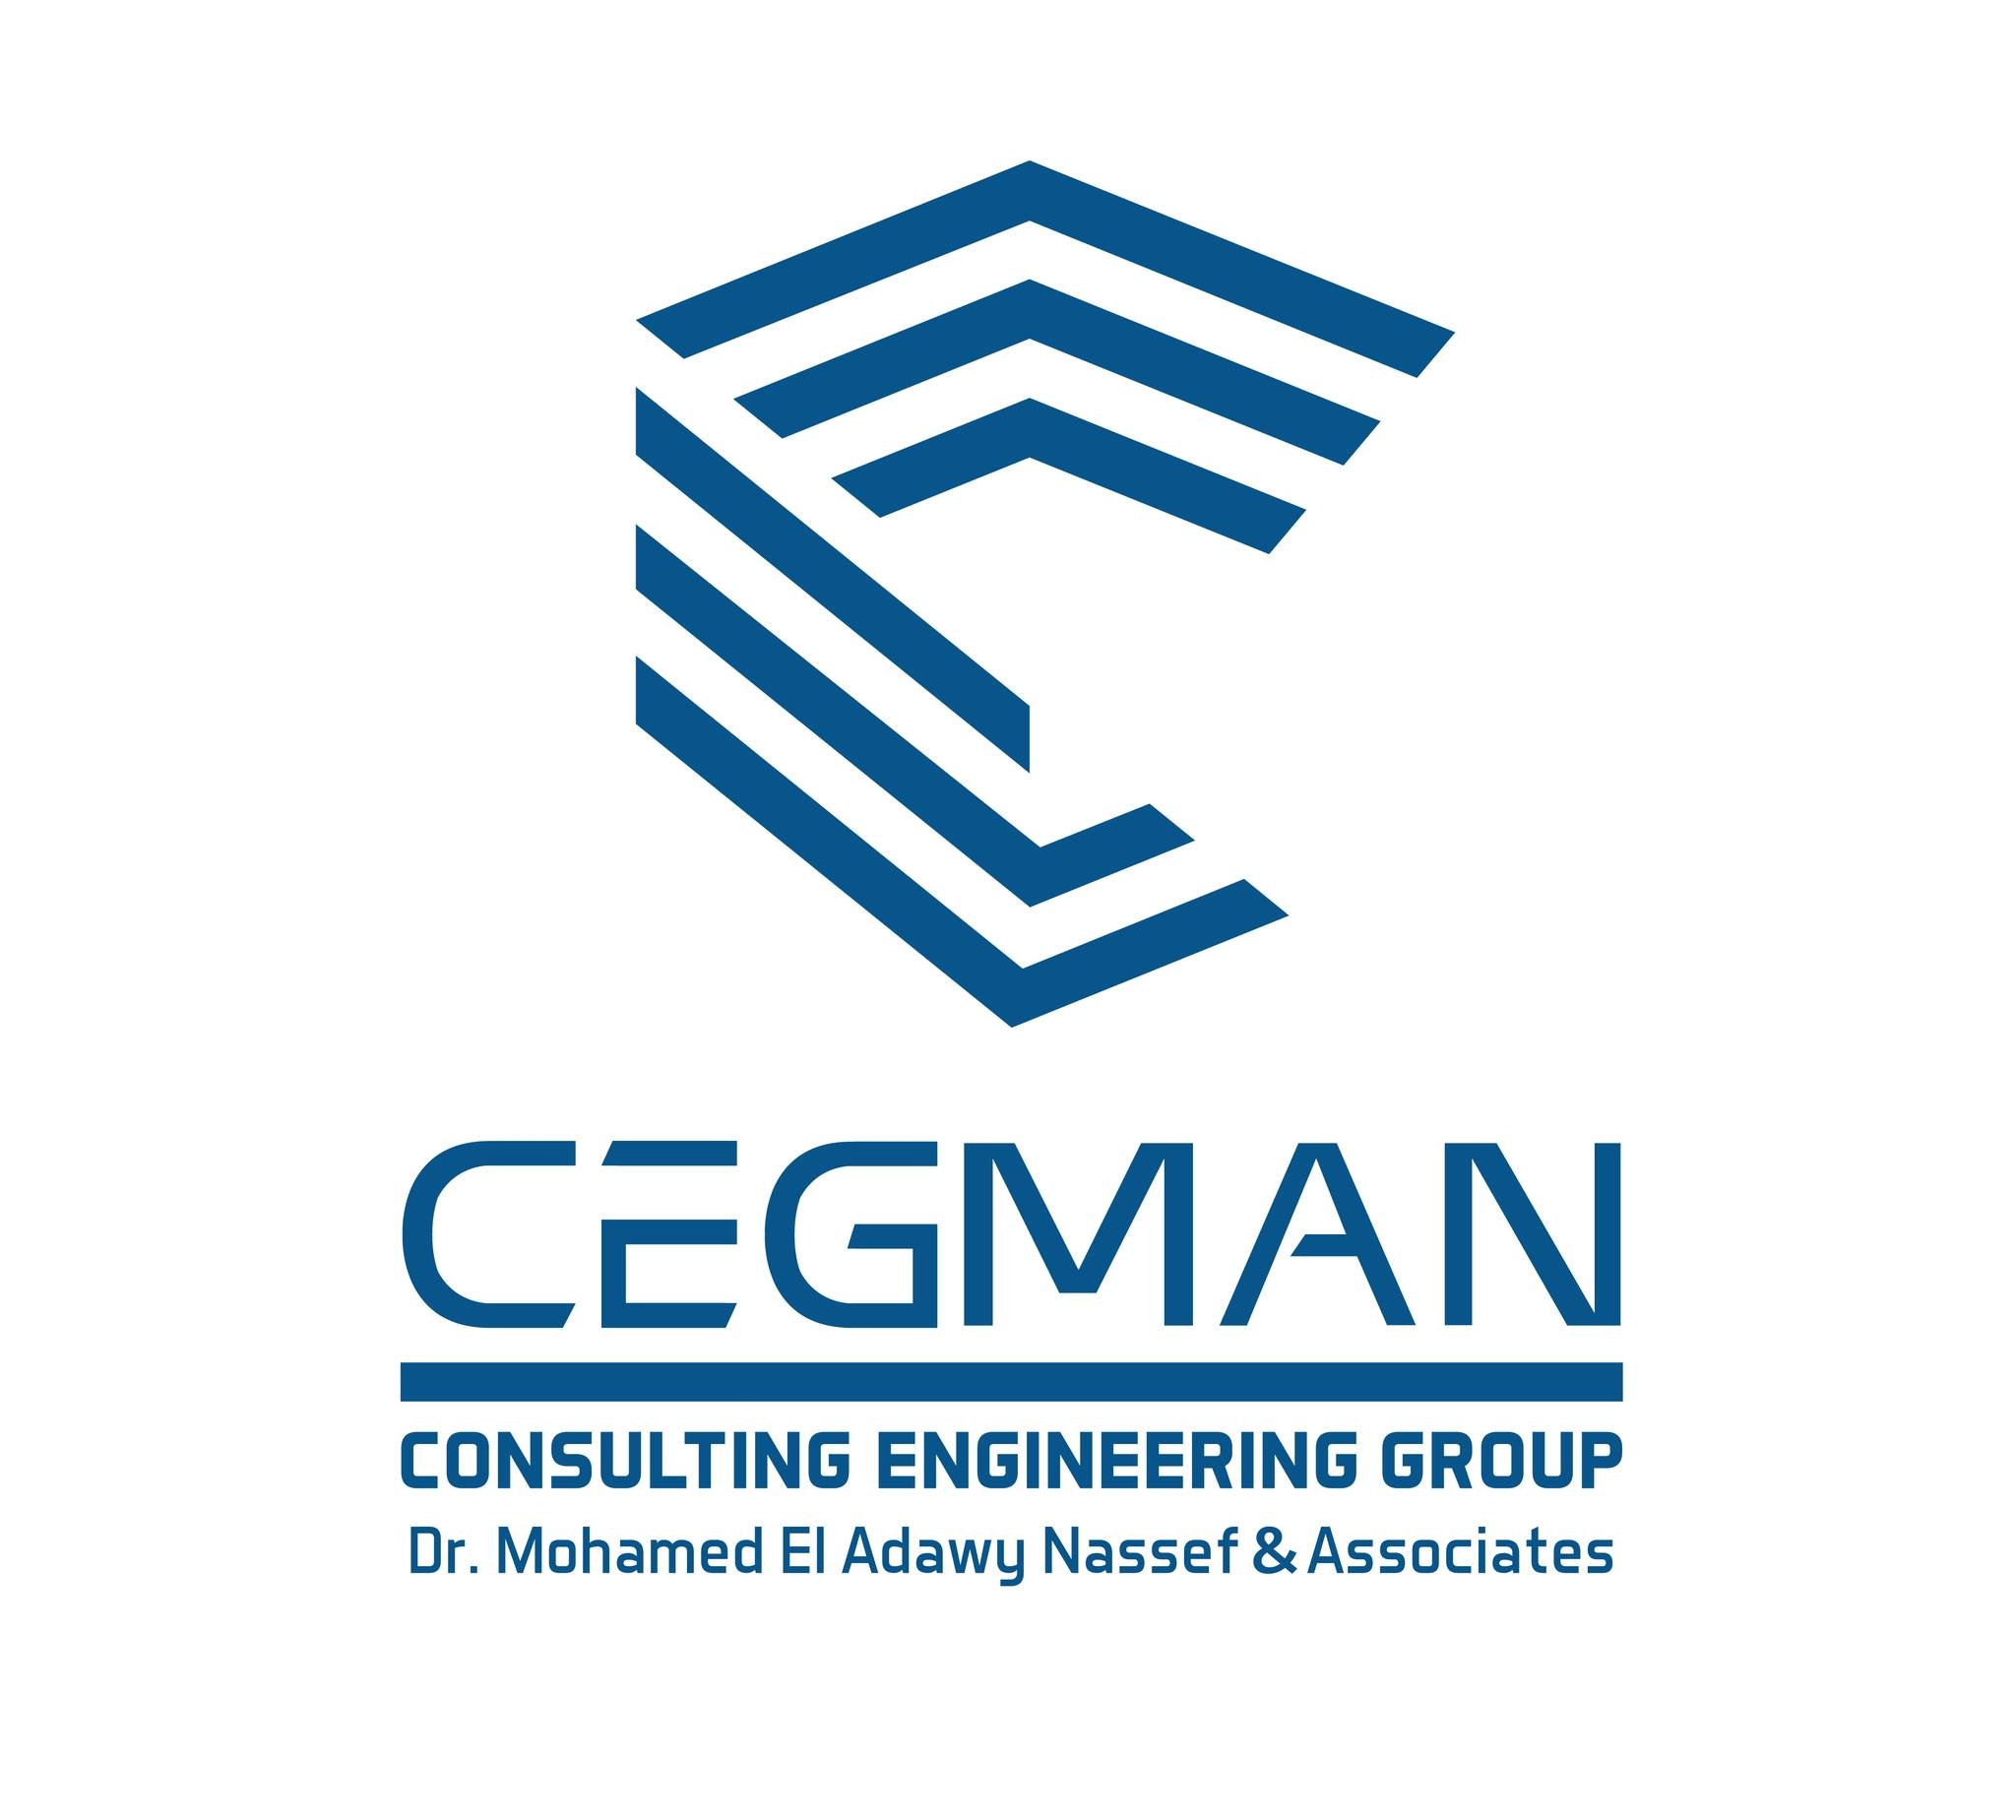 CEGMAN Consulting Engineering Group